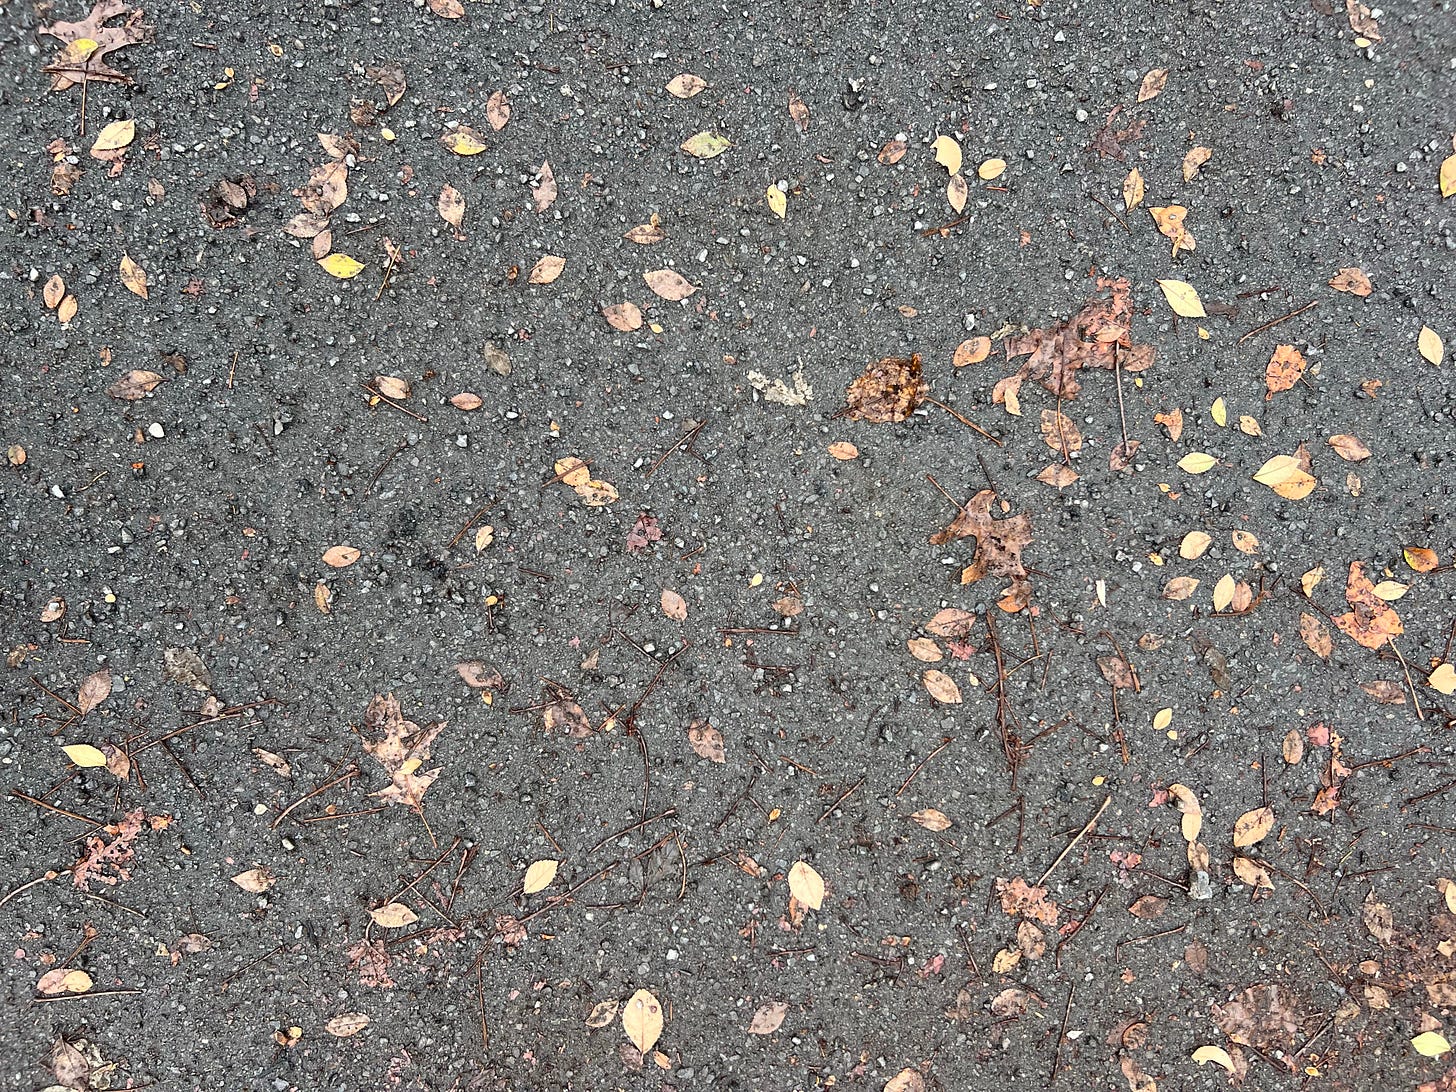 Autumn leaves on wet pavement shot from overhead.